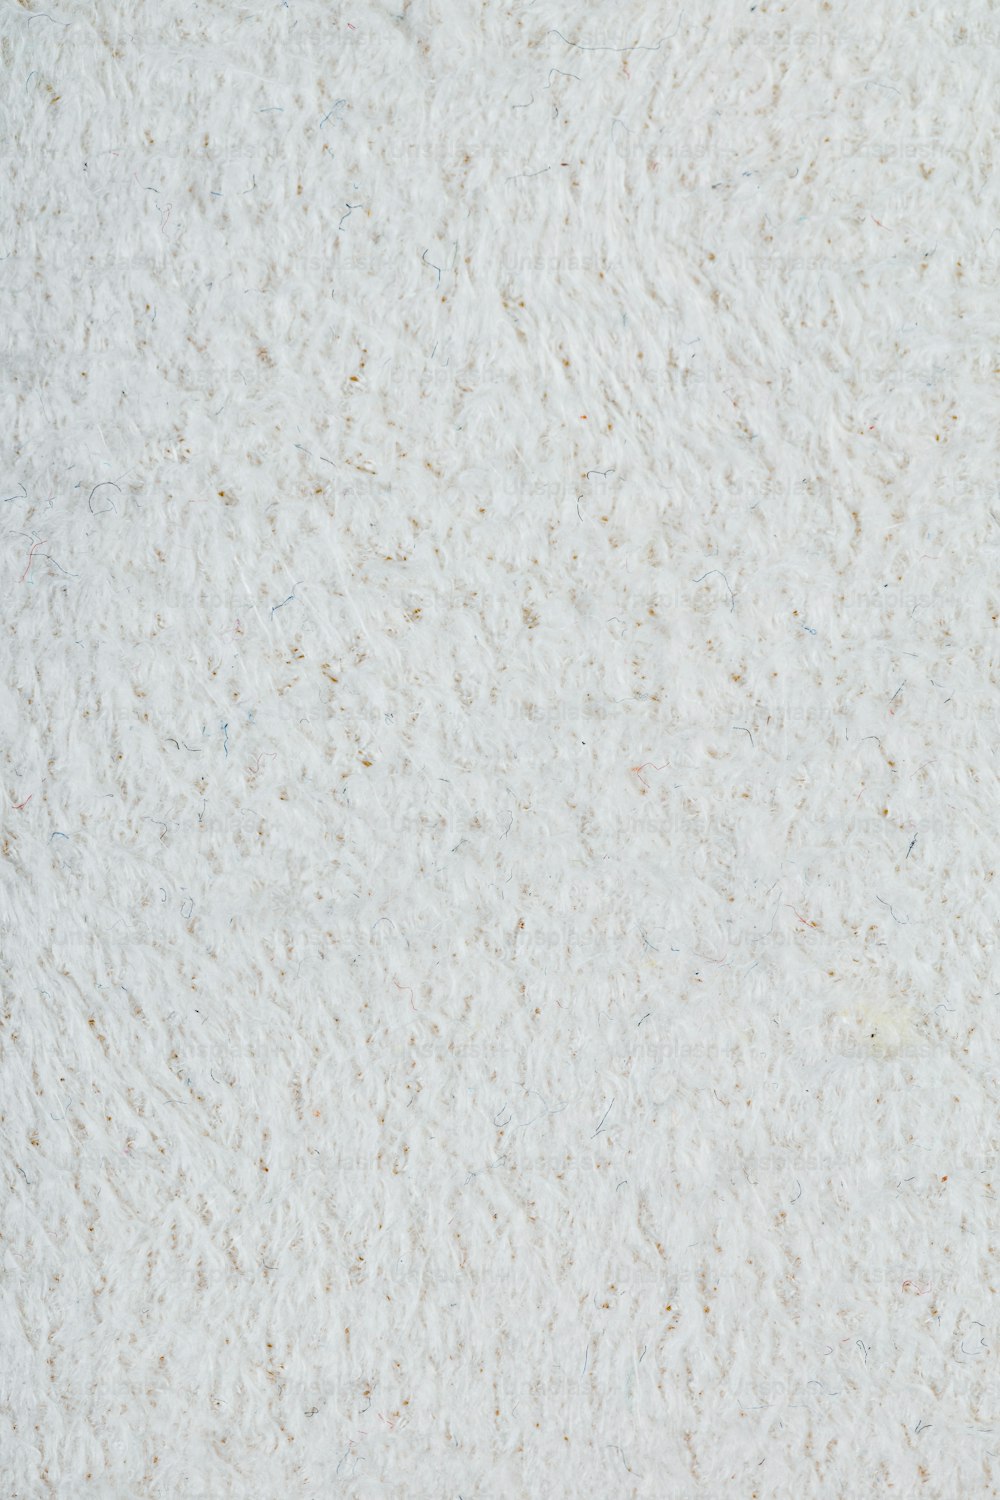 a close up of a white surface with small dots